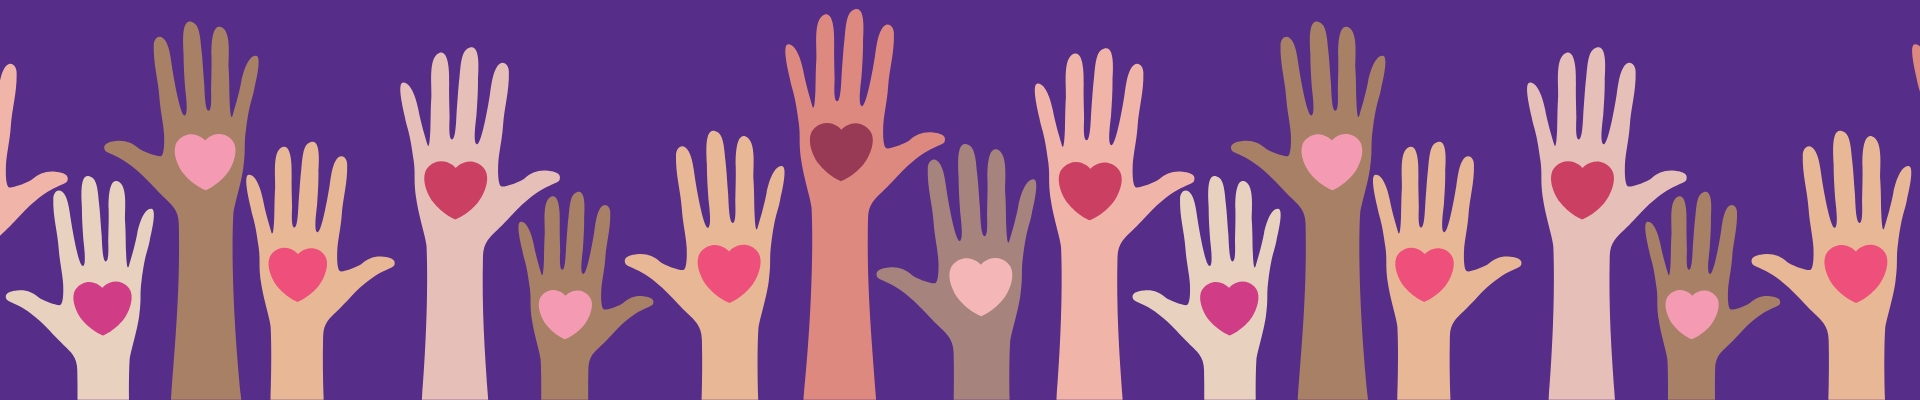 Graphic with a row of raised hands, all holding hearts.